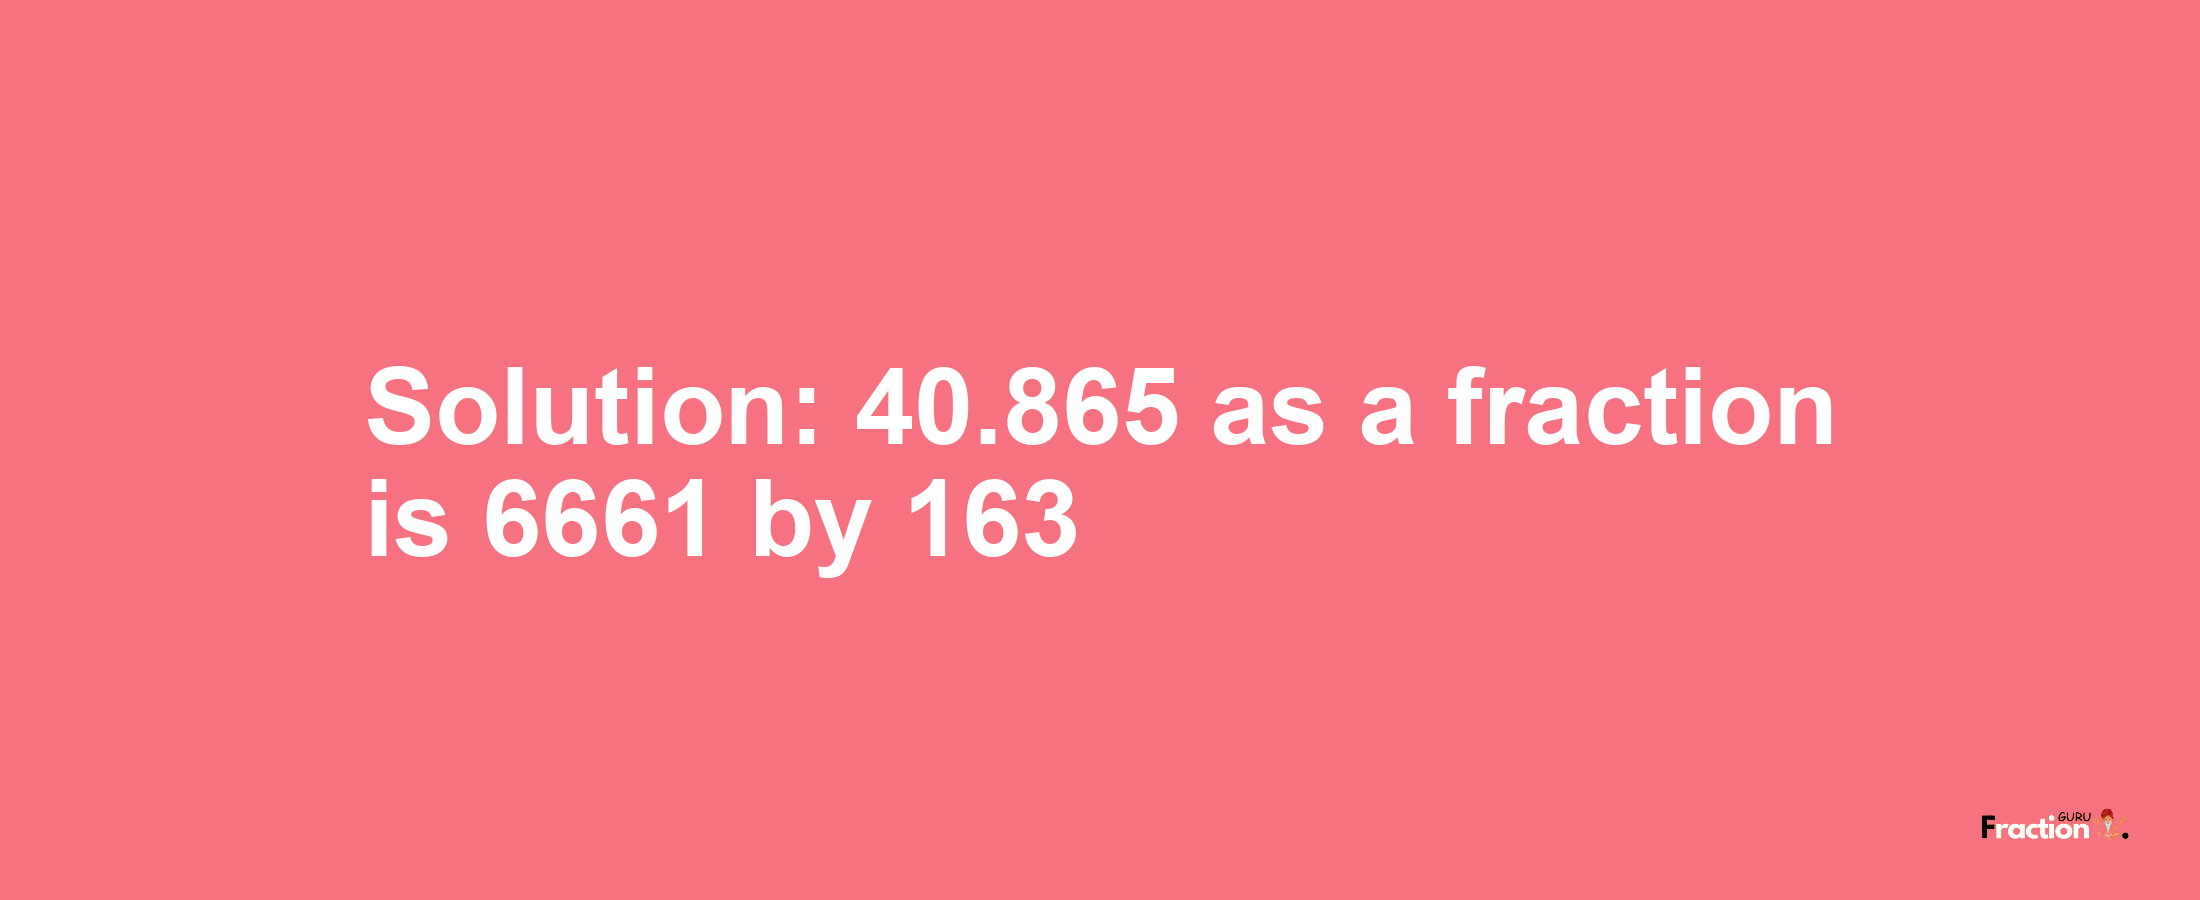 Solution:40.865 as a fraction is 6661/163